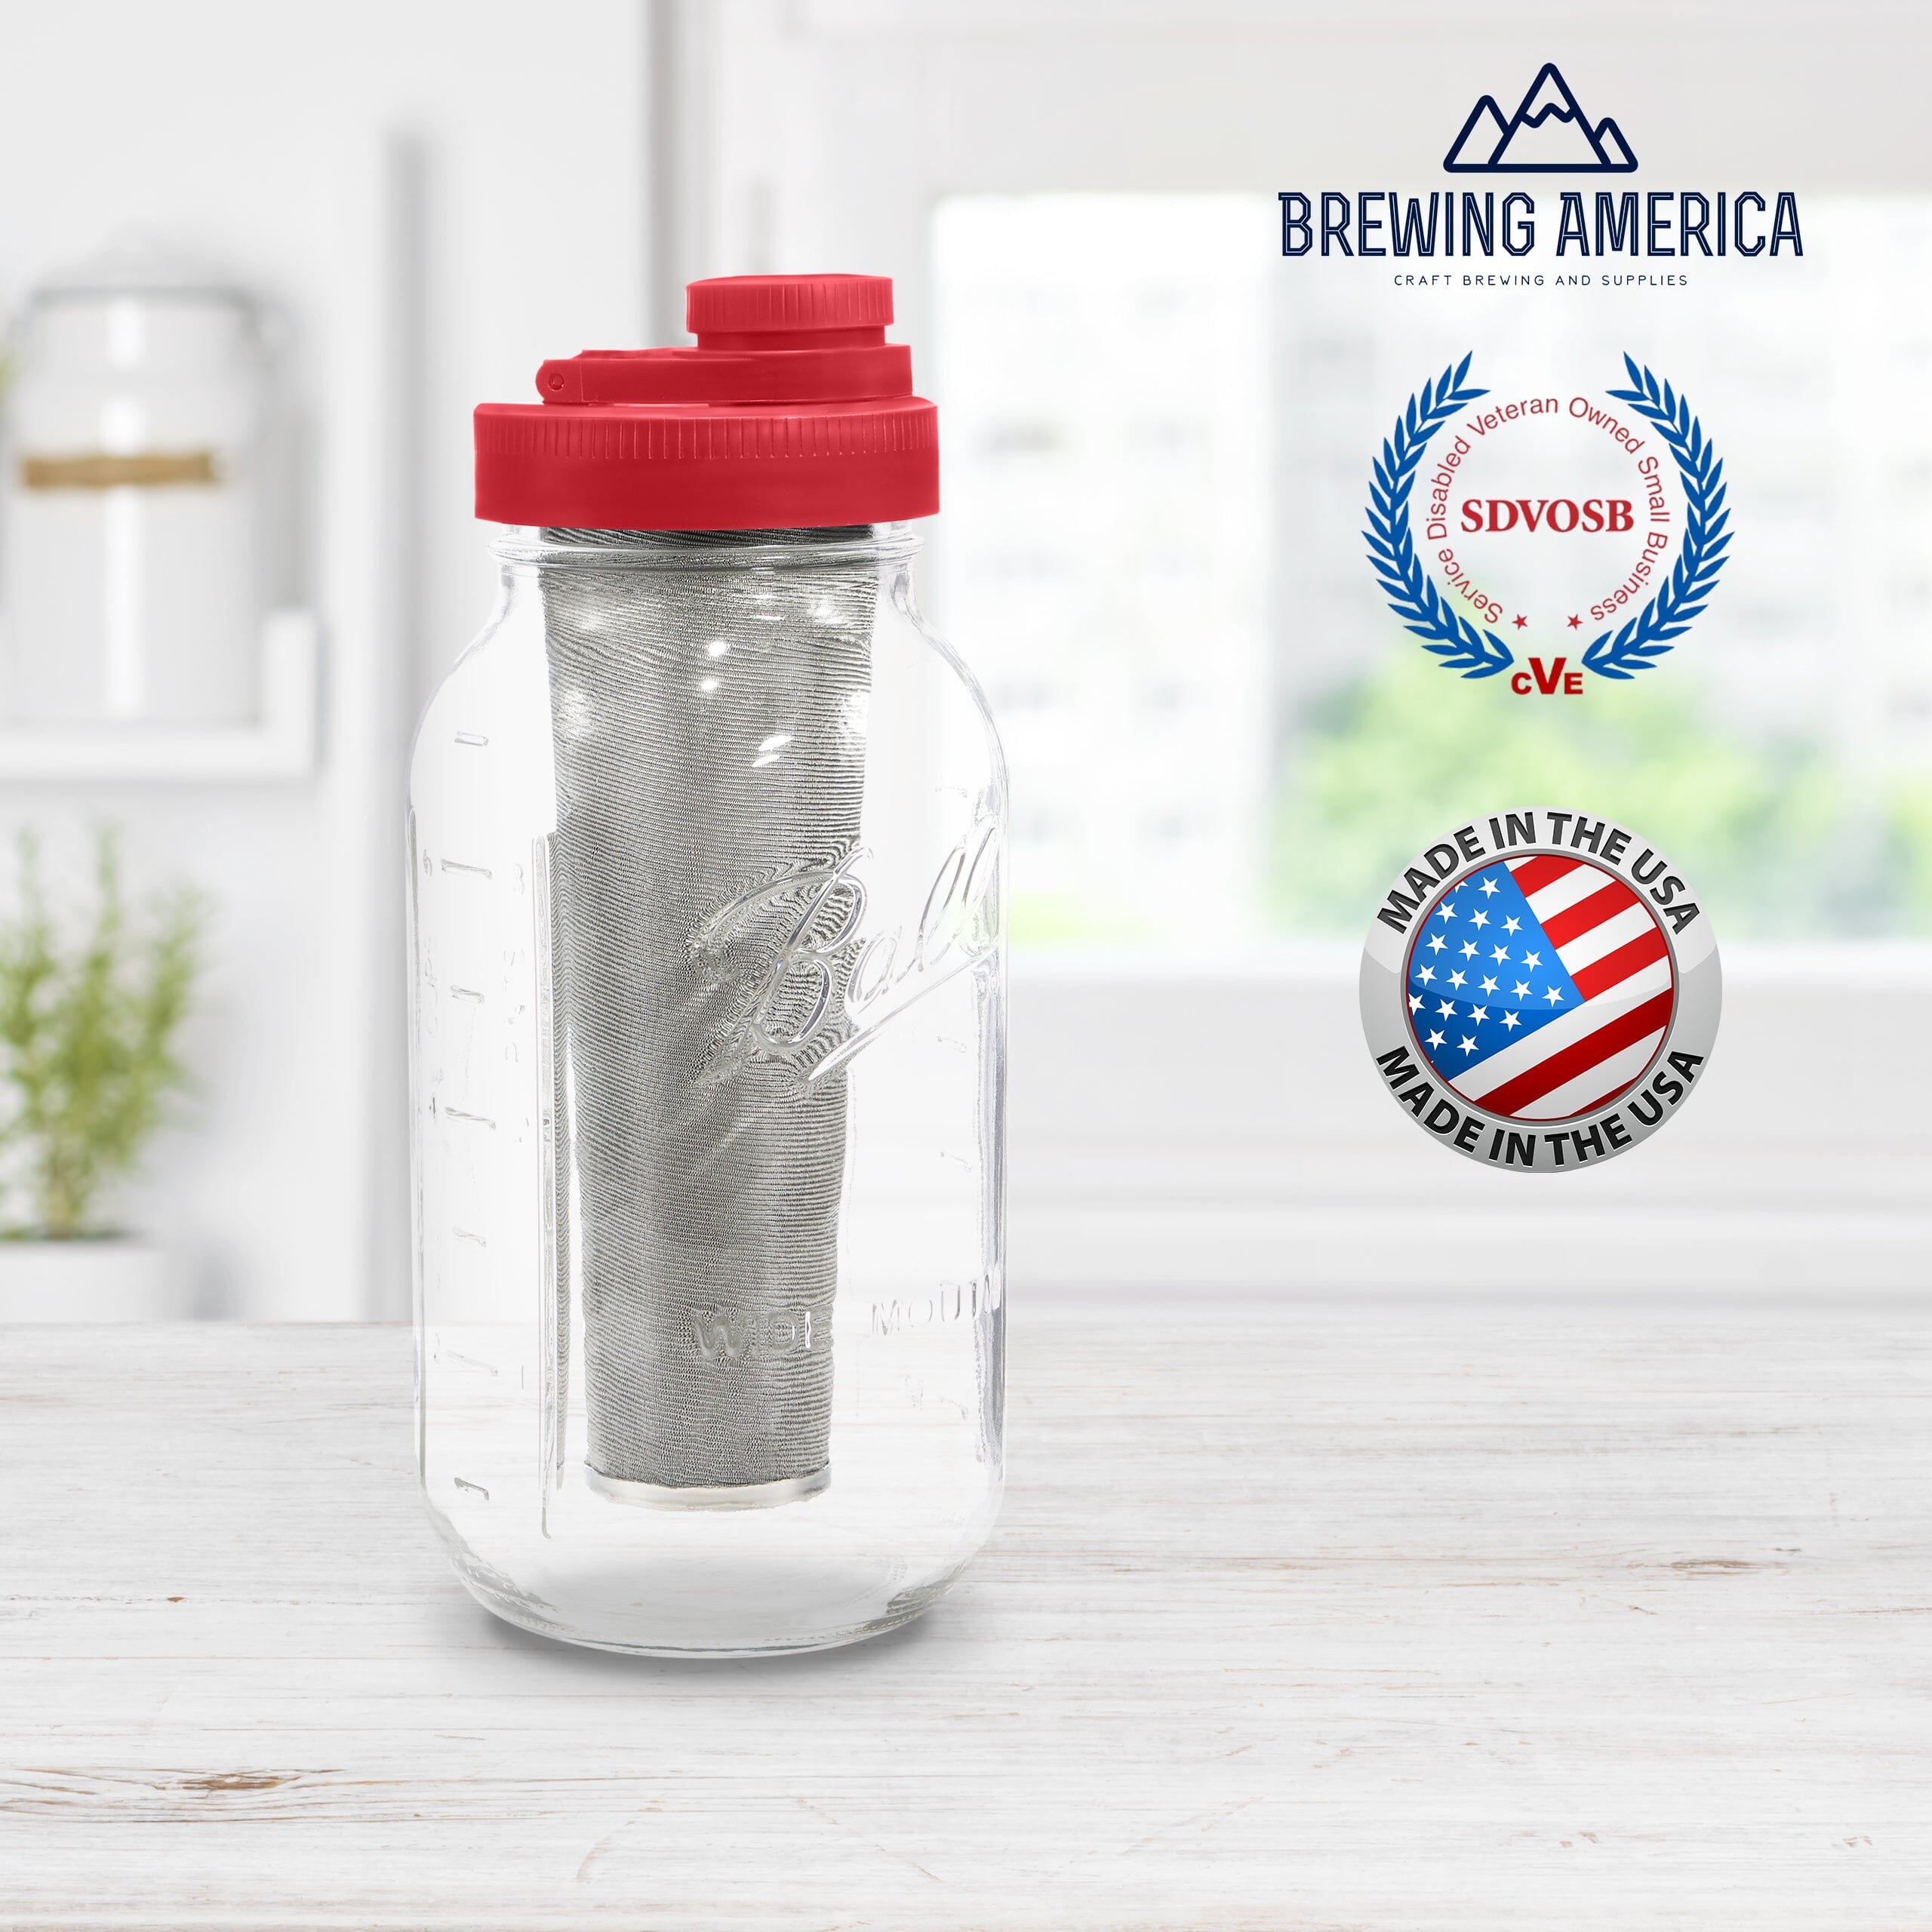 Cold Brew Coffee Maker Kit: Wide Mouth for Coffee, Infused Tea, Alcohol - 2 Quart 64 oz Old Glory Red Cold Brew Coffee Maker Brewing America 